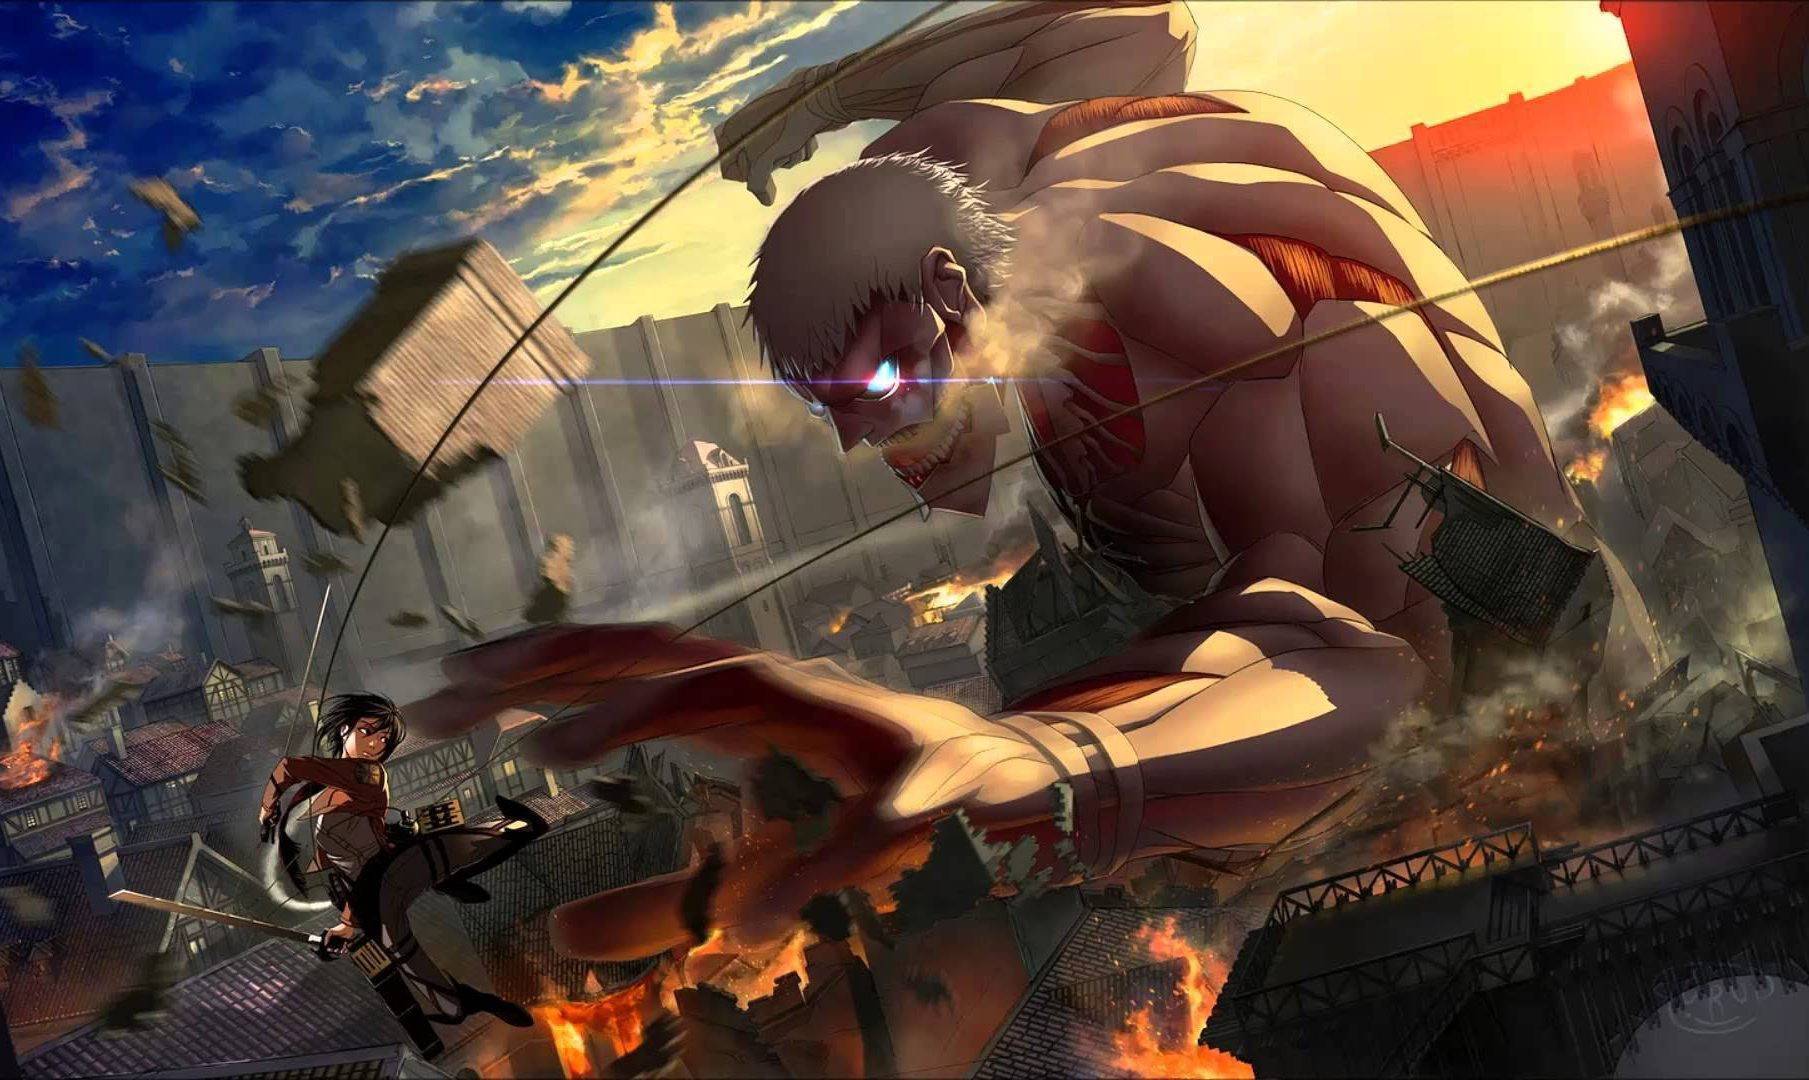  Attack on Titan 2 - Nintendo Switch : Everything Else